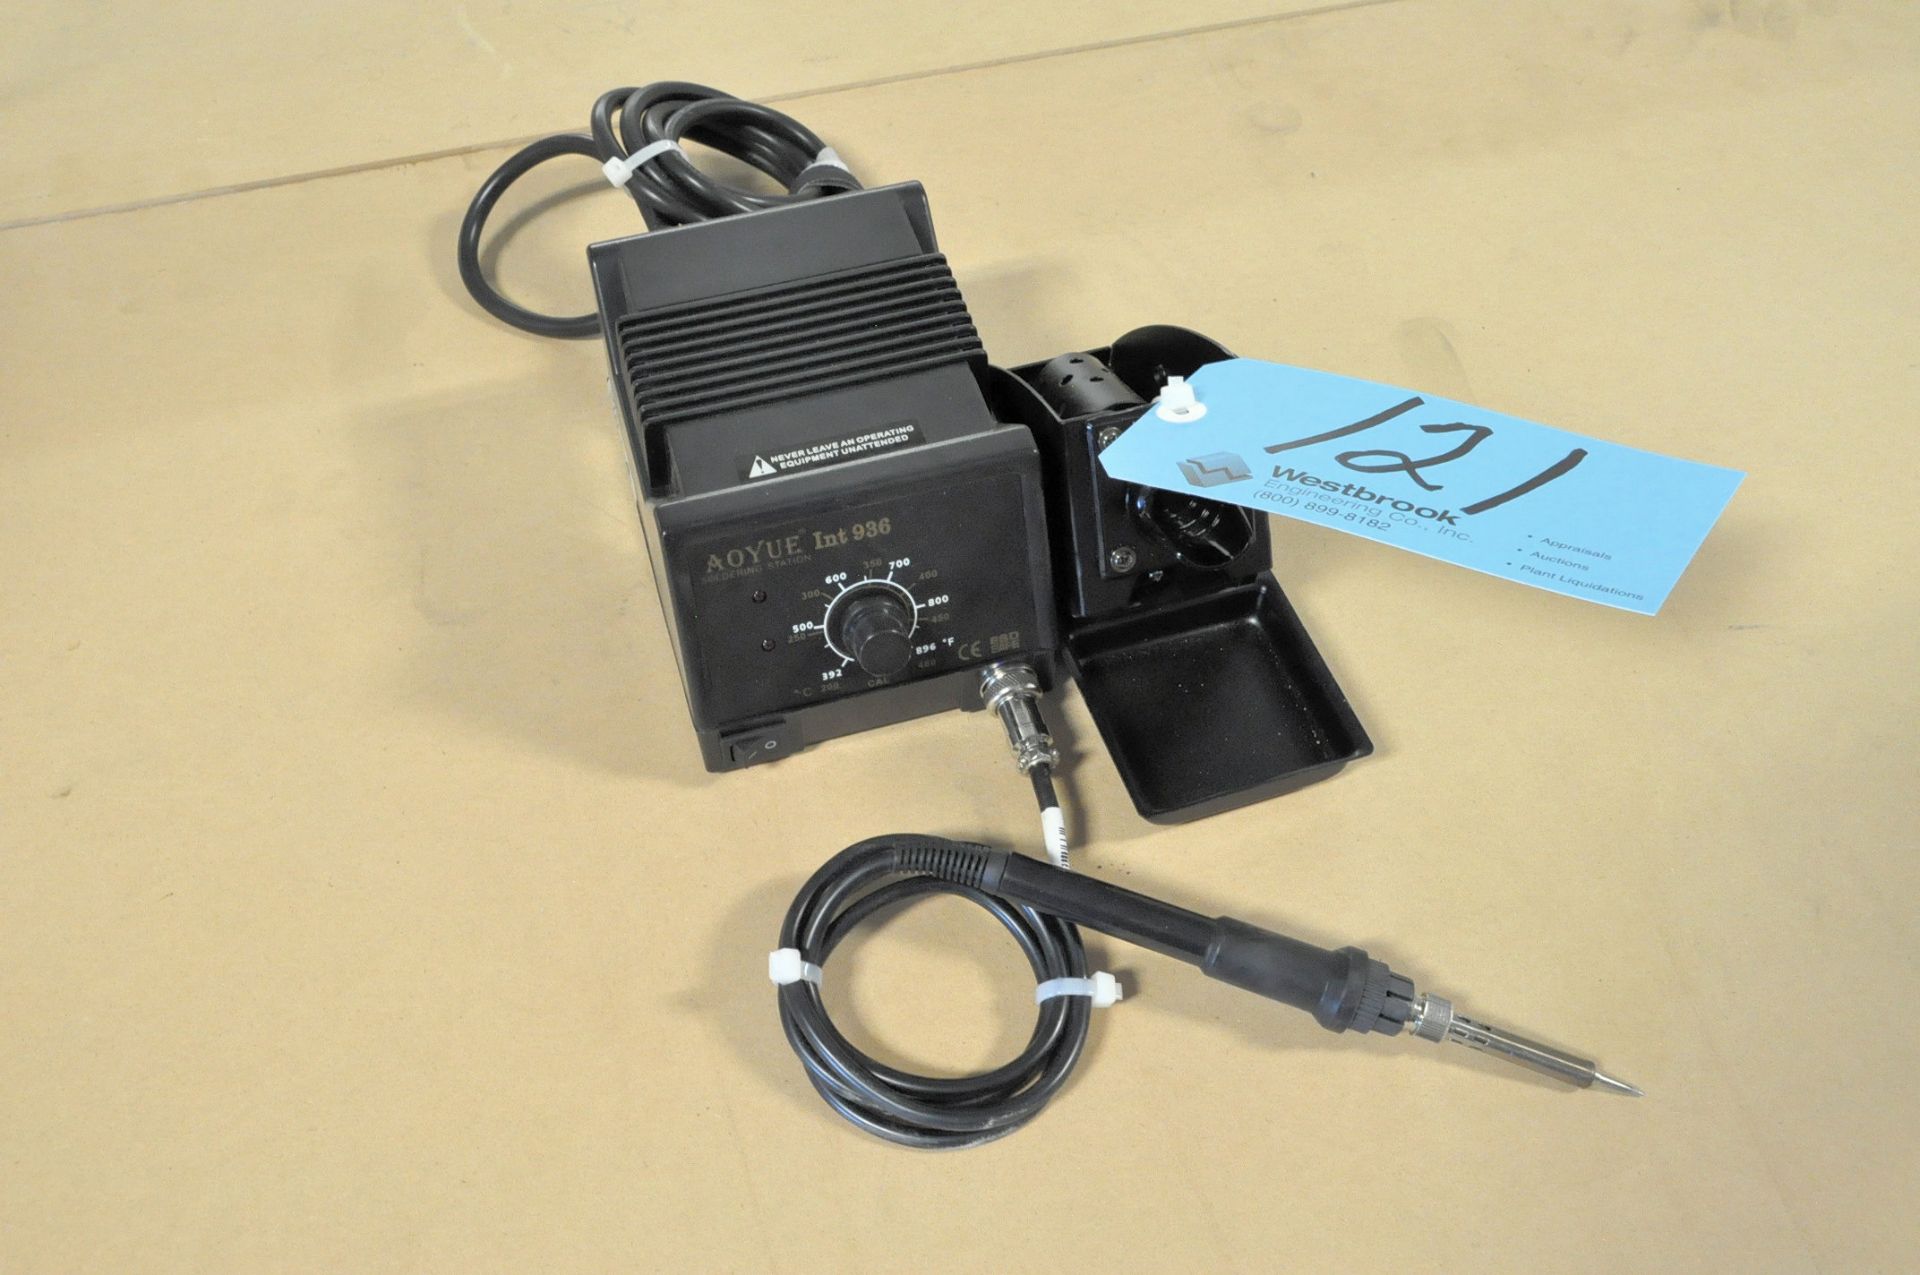 Aoyue Int 936, Soldering Station, with Solder Gun